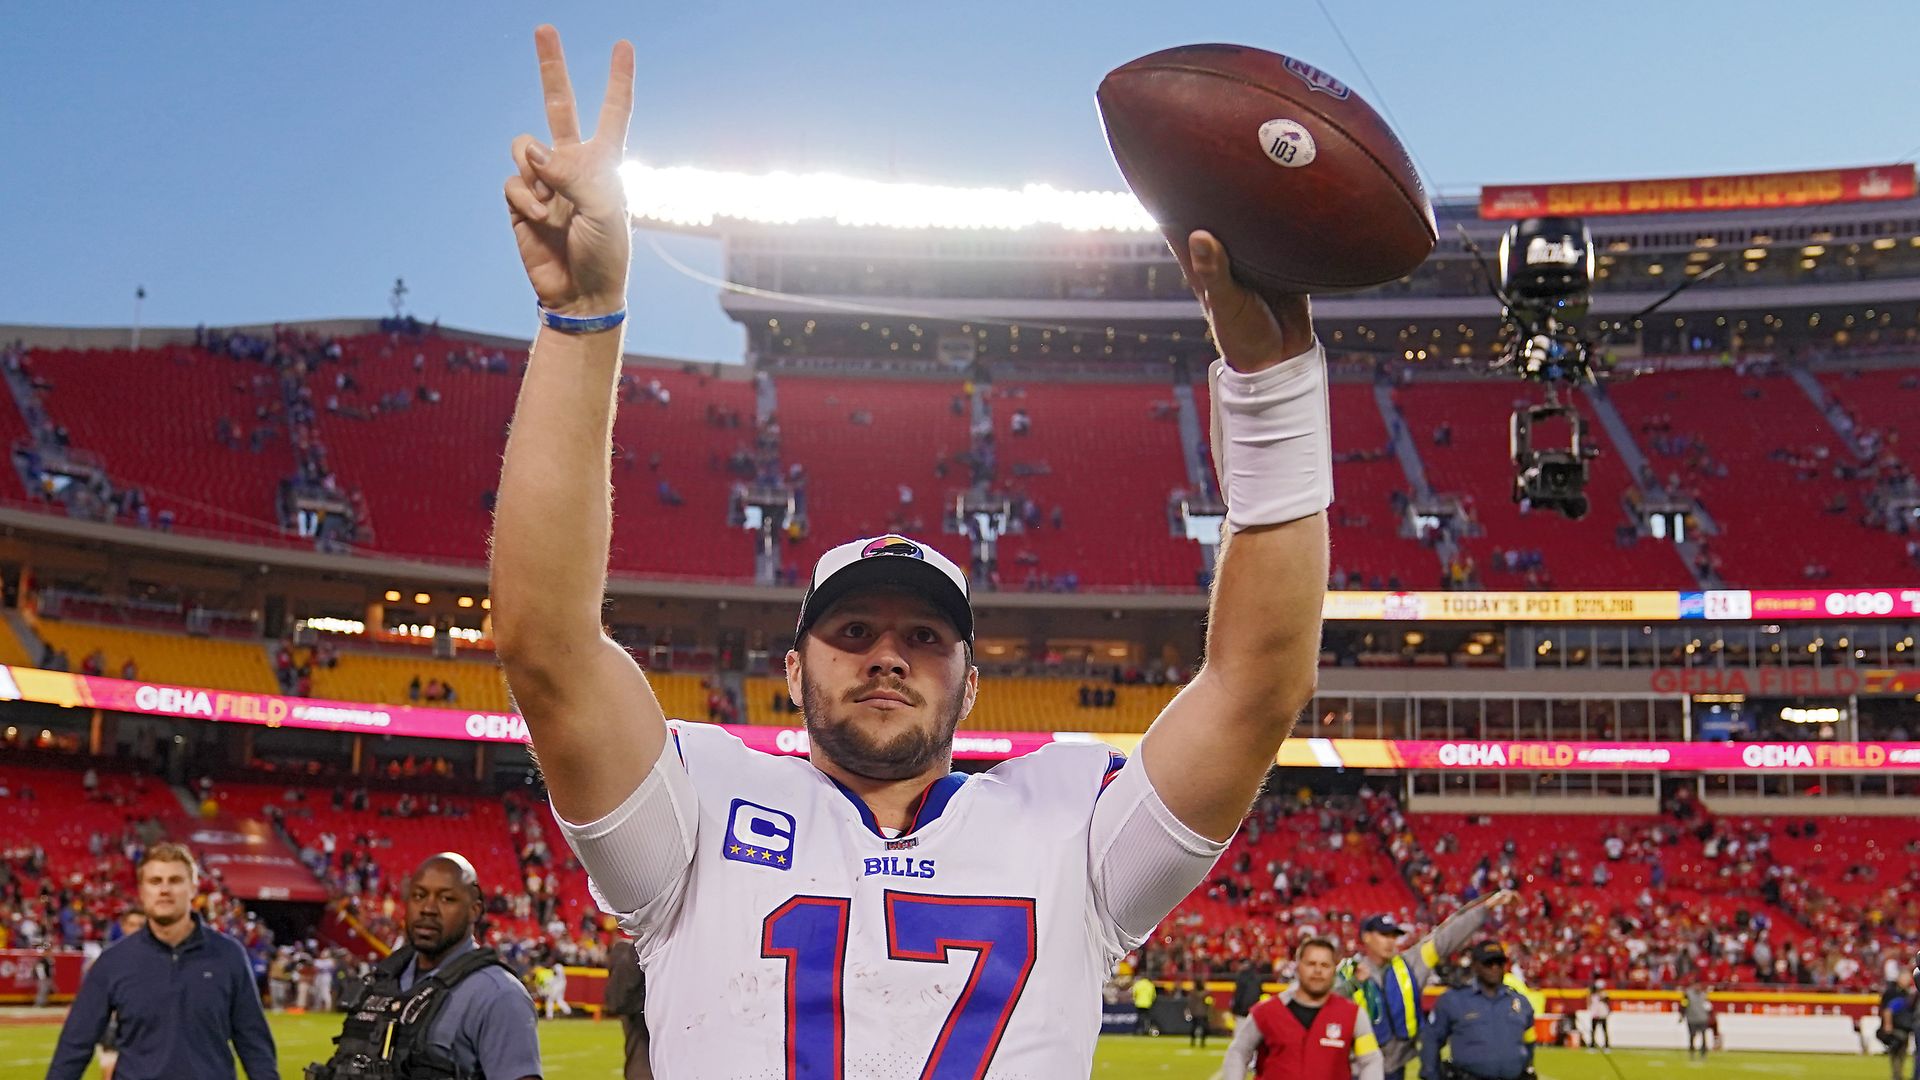 Buffalo Bills quarterback Josh Allen holds up a football and peace sign to fans in a stadium.